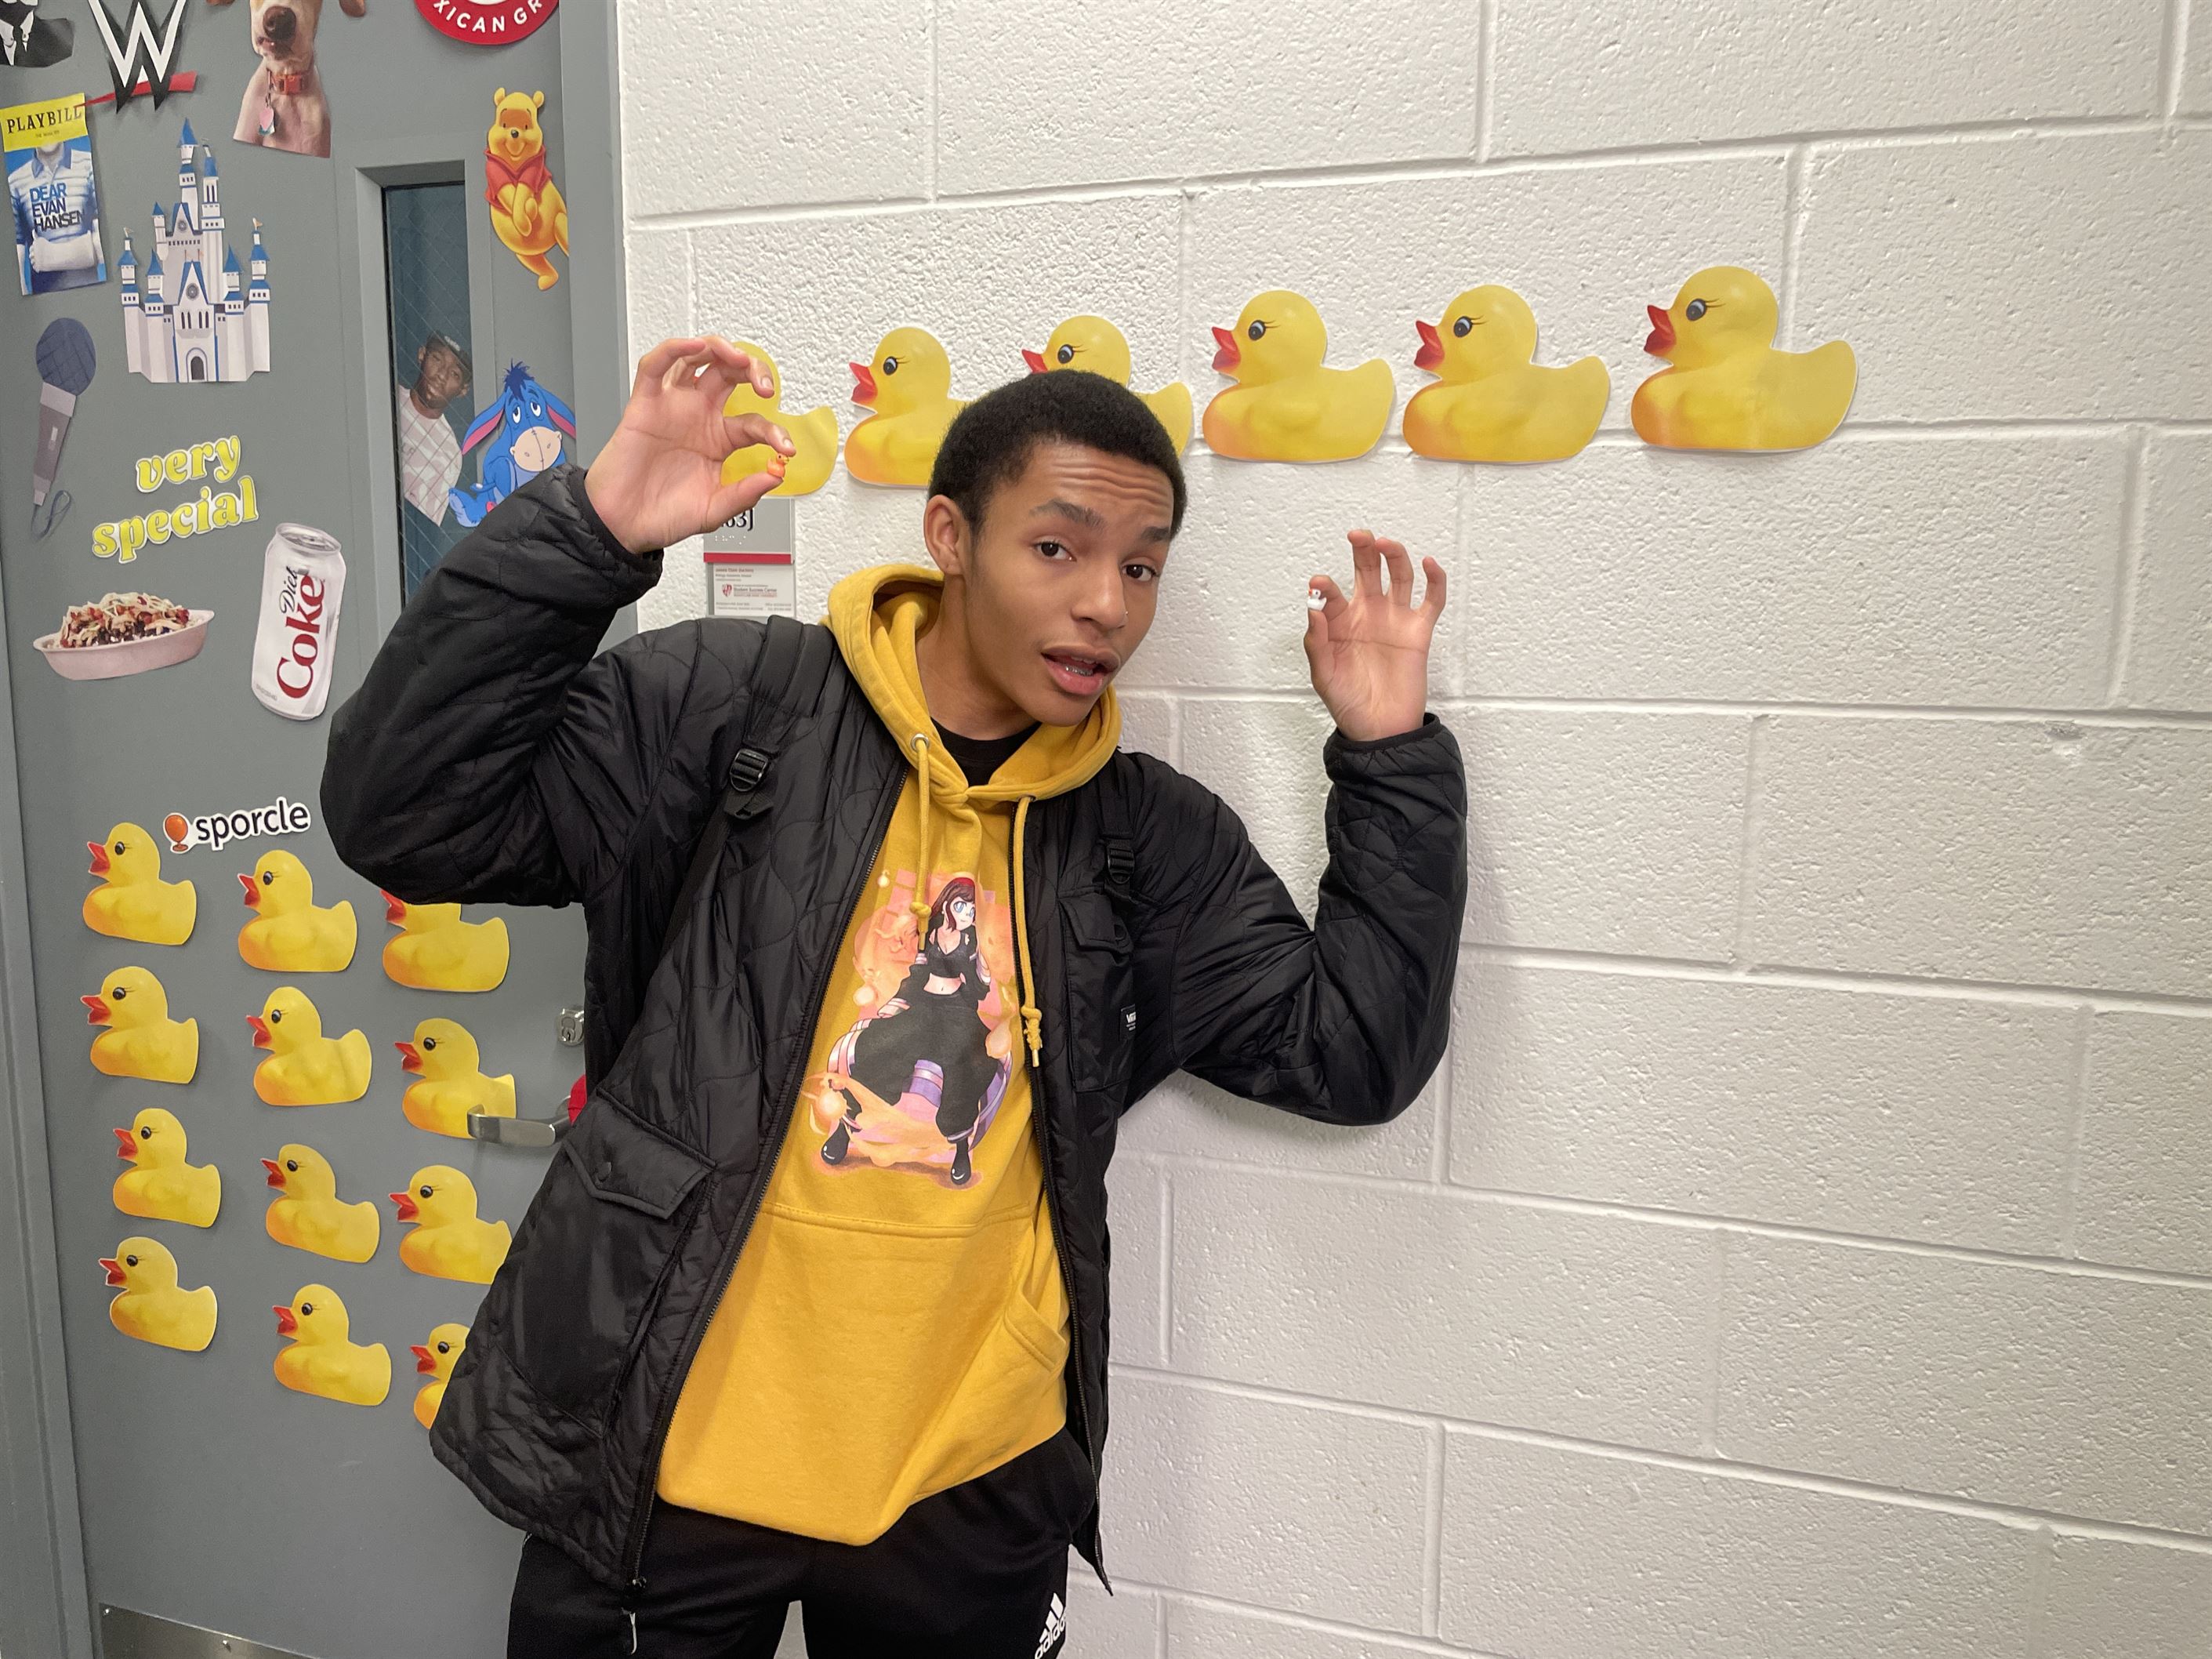 Miles Banks likes to go all out when hiding his ducks.